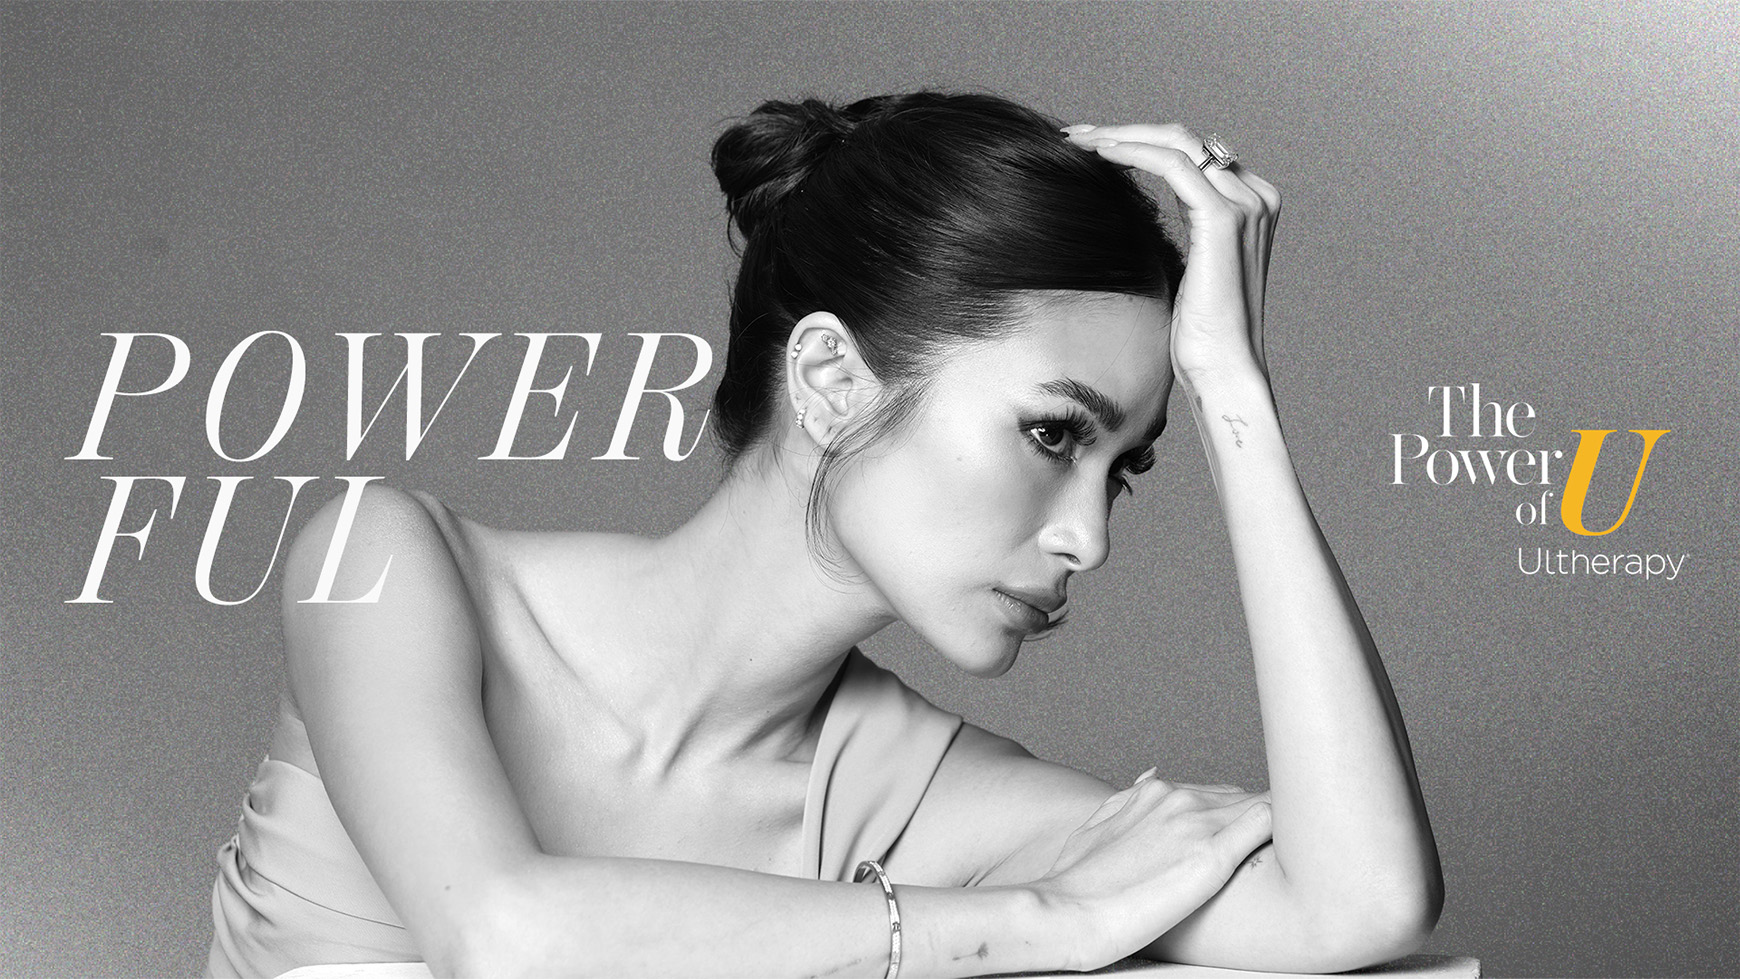 Heart Evangelista stars in the Ultherapy®'s "The Power of U" campaign.